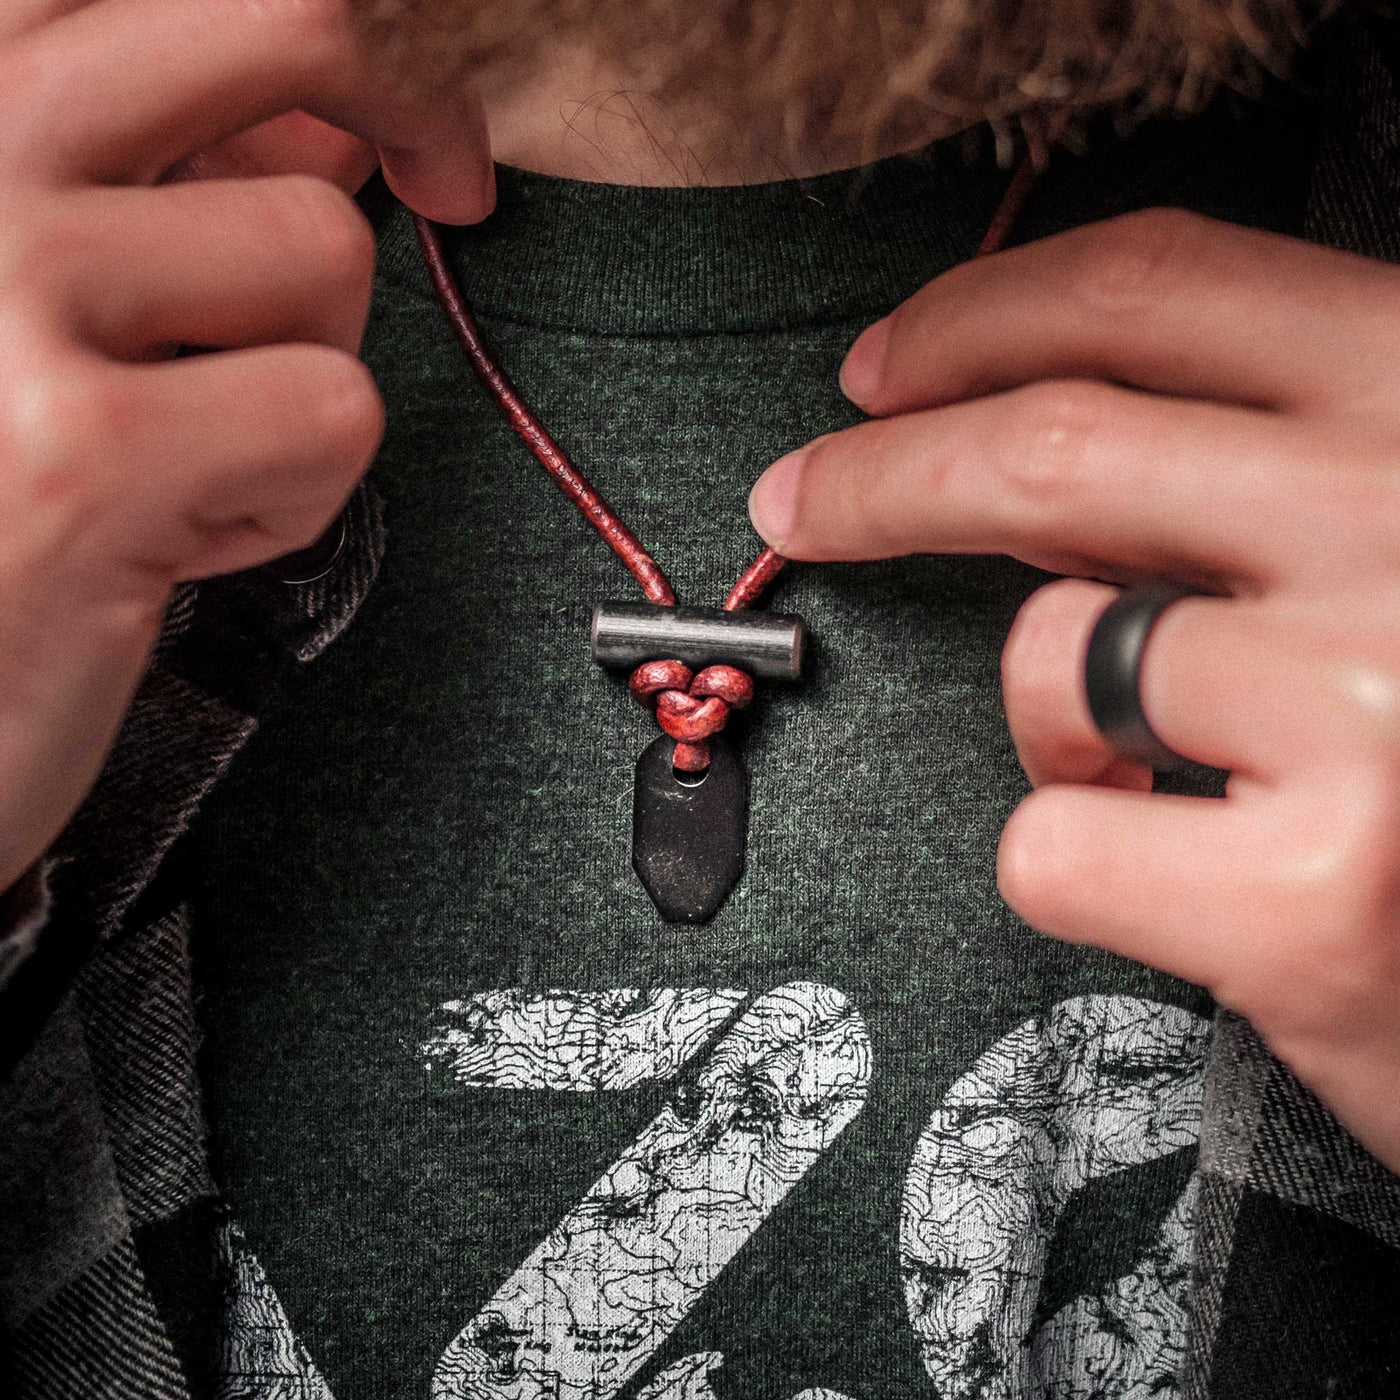 Black ceramic bushcraft necklace by Wazoo shown worn on a male with green shirt